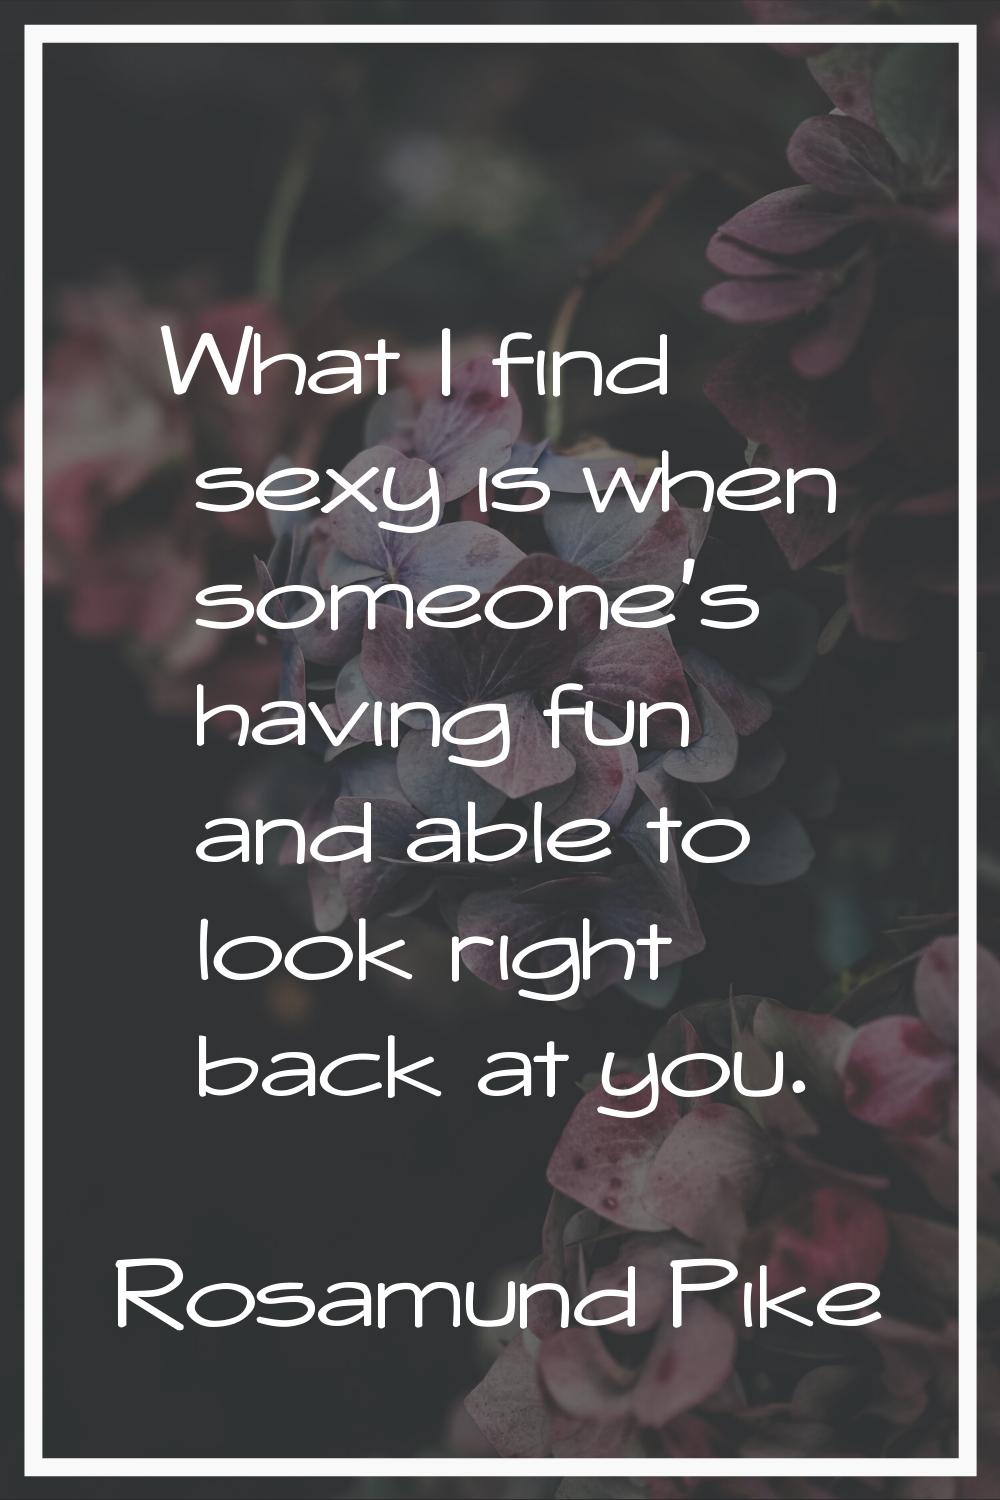 What I find sexy is when someone's having fun and able to look right back at you.